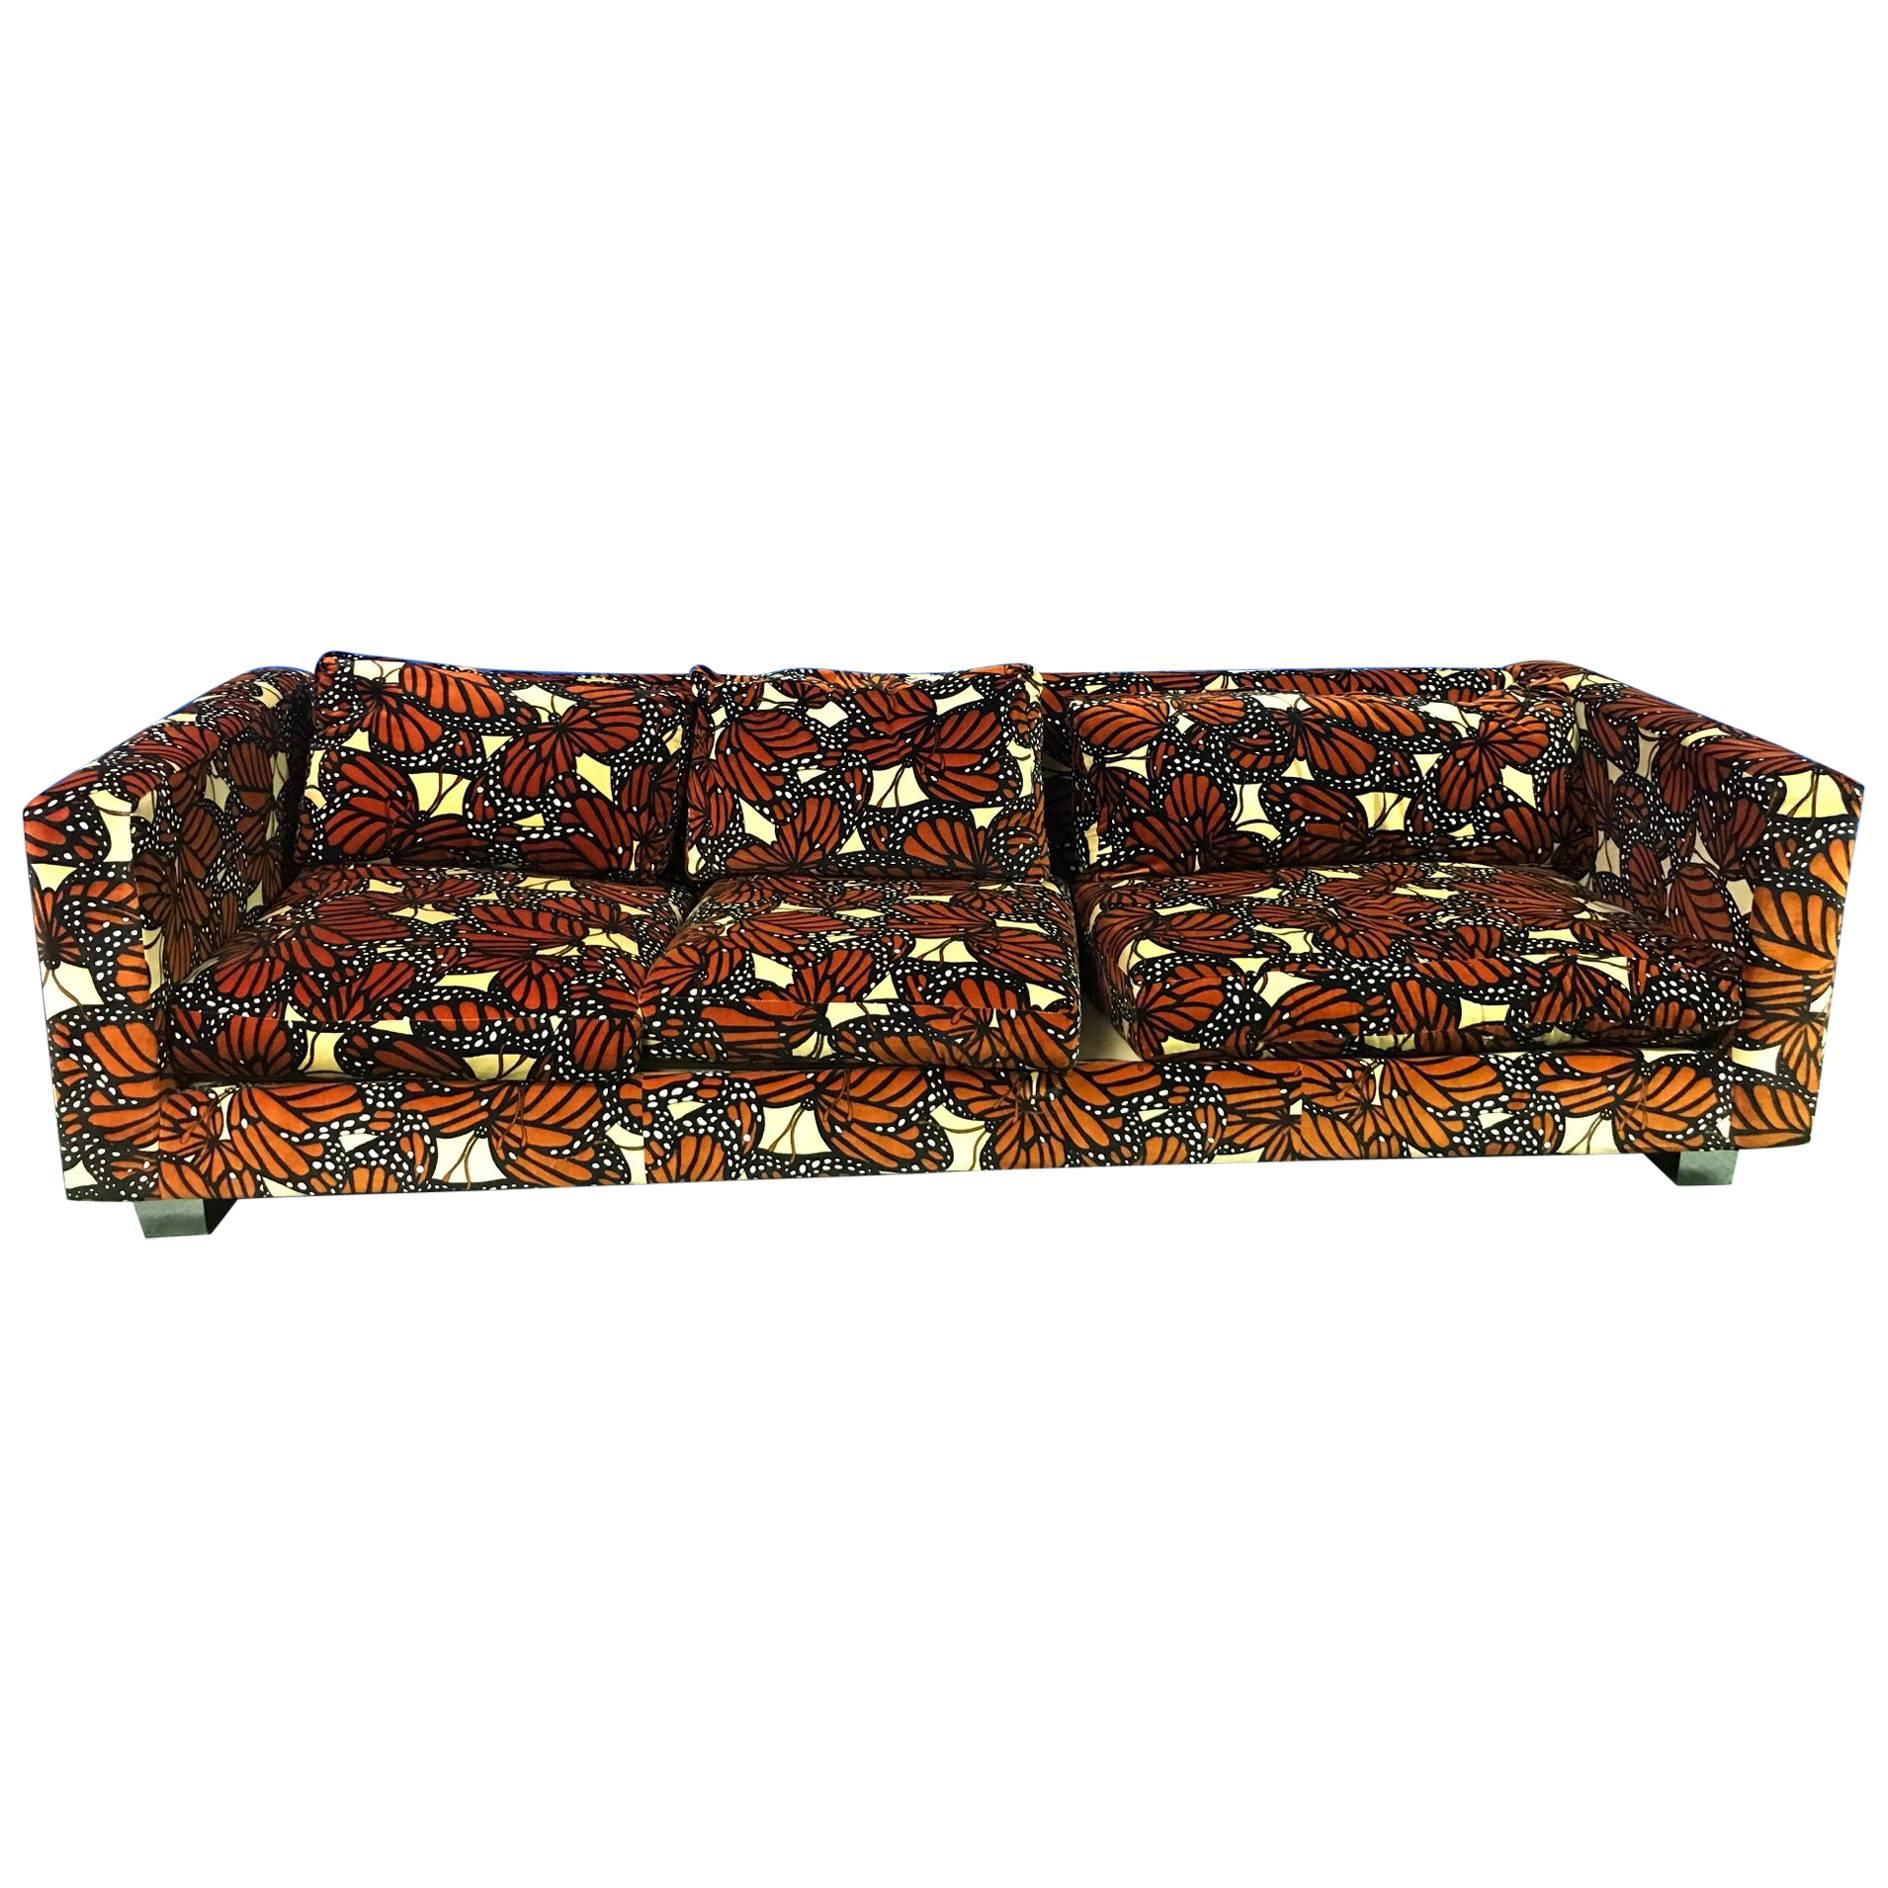 Cityscape Style Sofa With Jack Lenor Larsen Fabric in The Style of Paul Evans For Sale